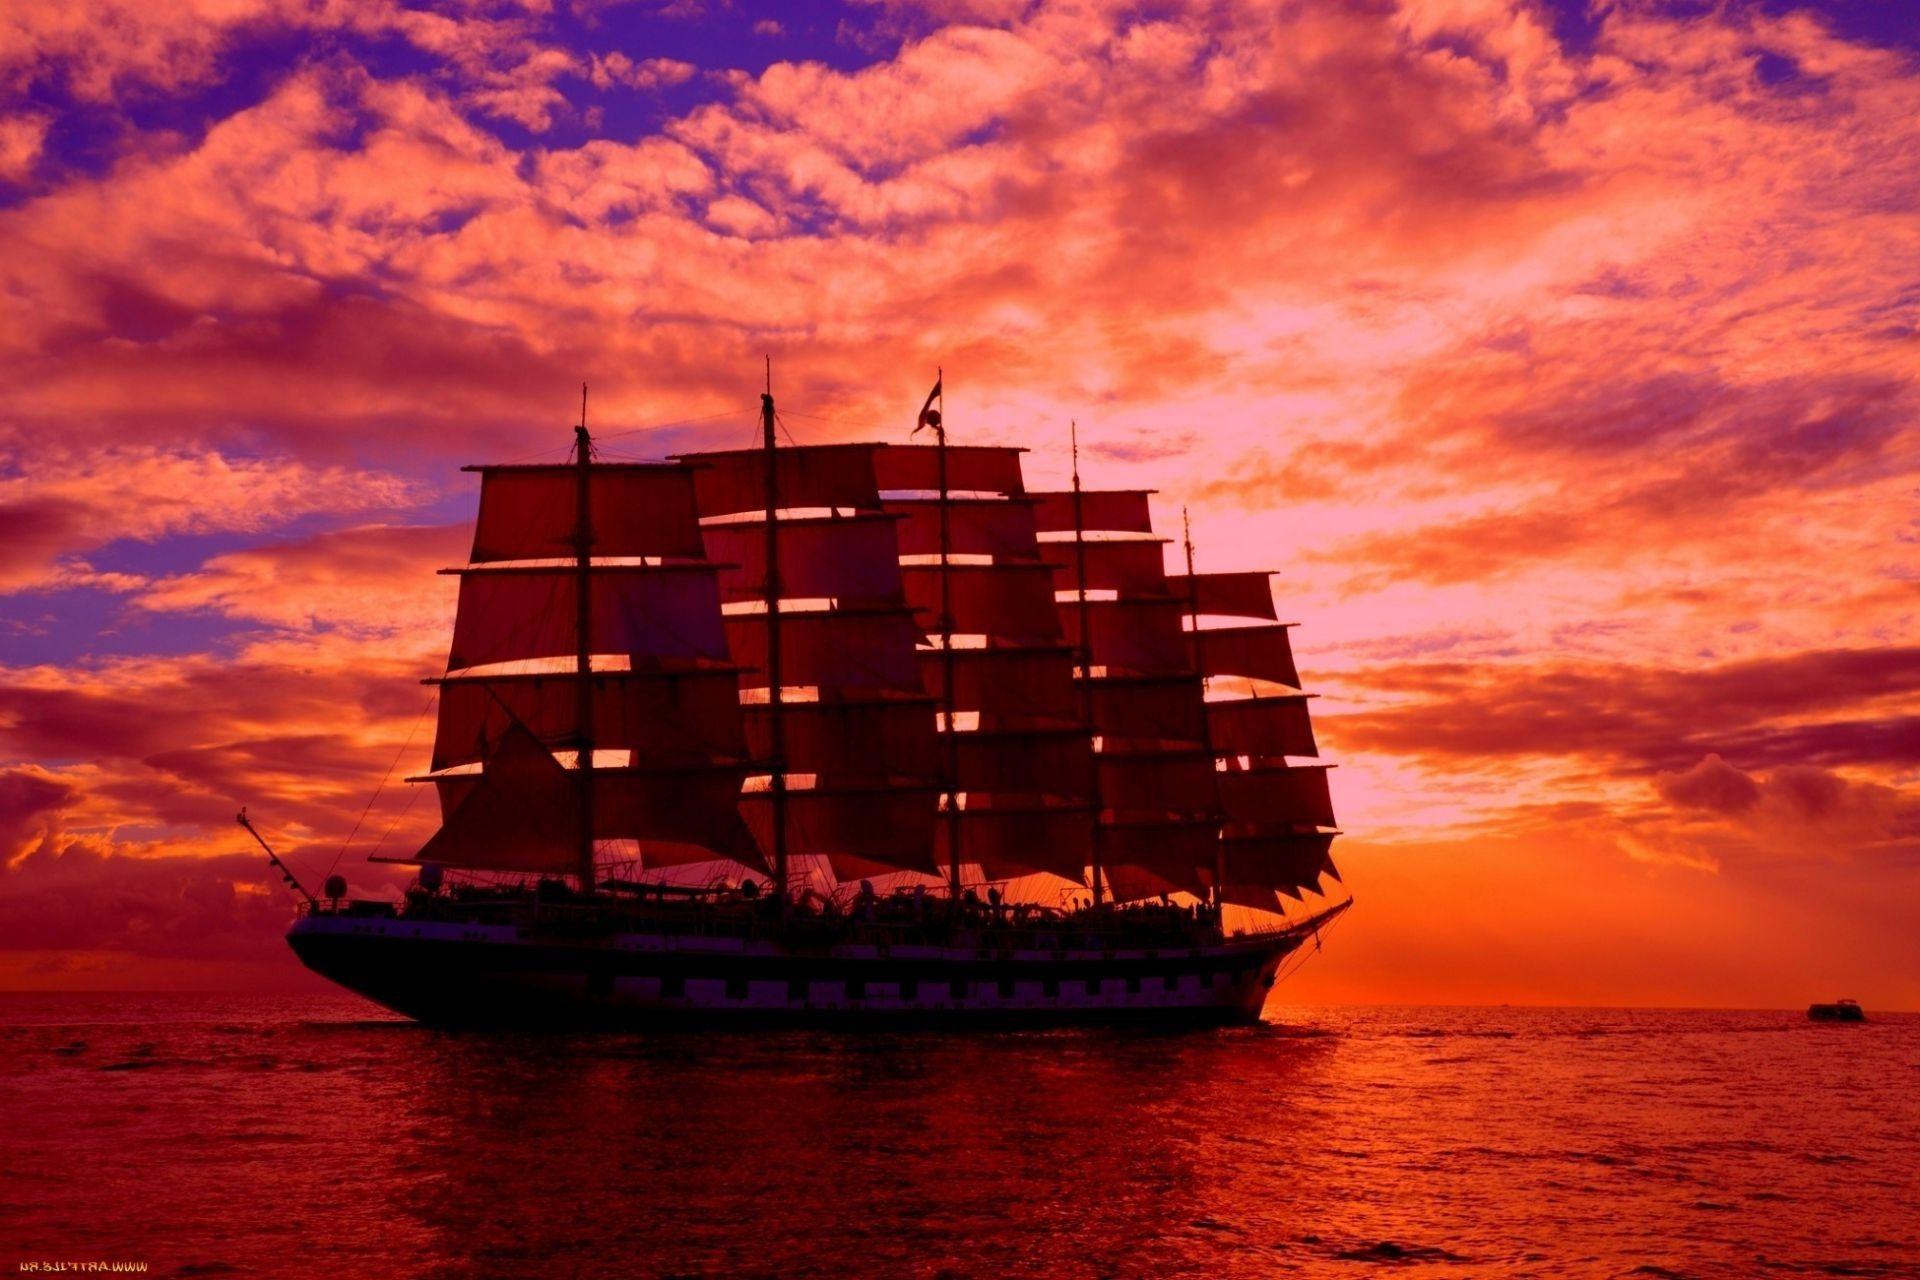 Sunset sails. Android wallpaper for free